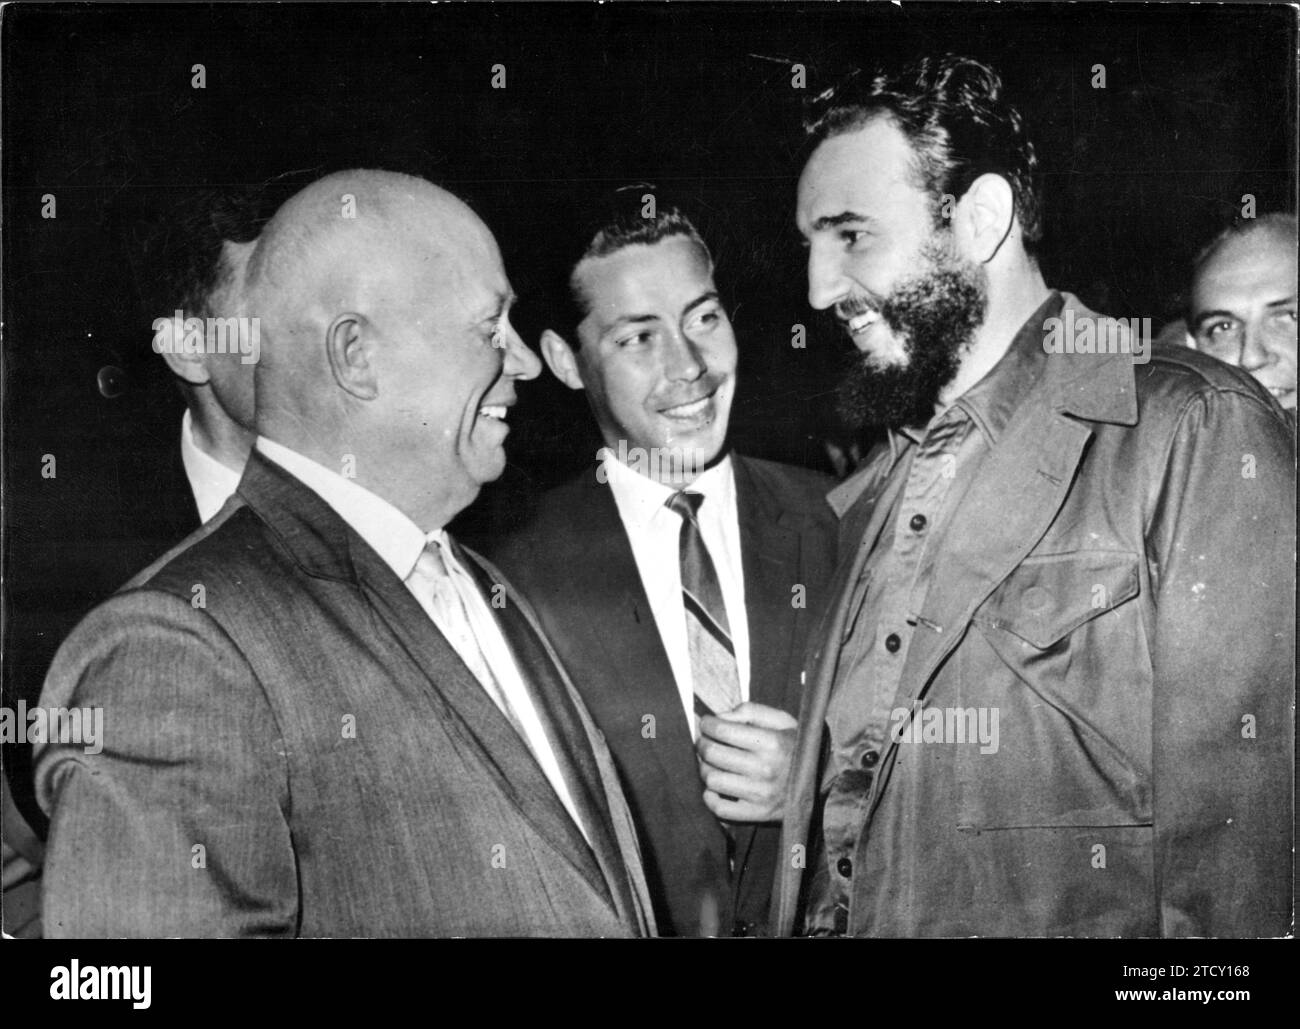 09/25/1960. Castro and Khrushchev in New York, where they will attend the United Nations summit. Credit: Album / Archivo ABC / Torremocha Stock Photo